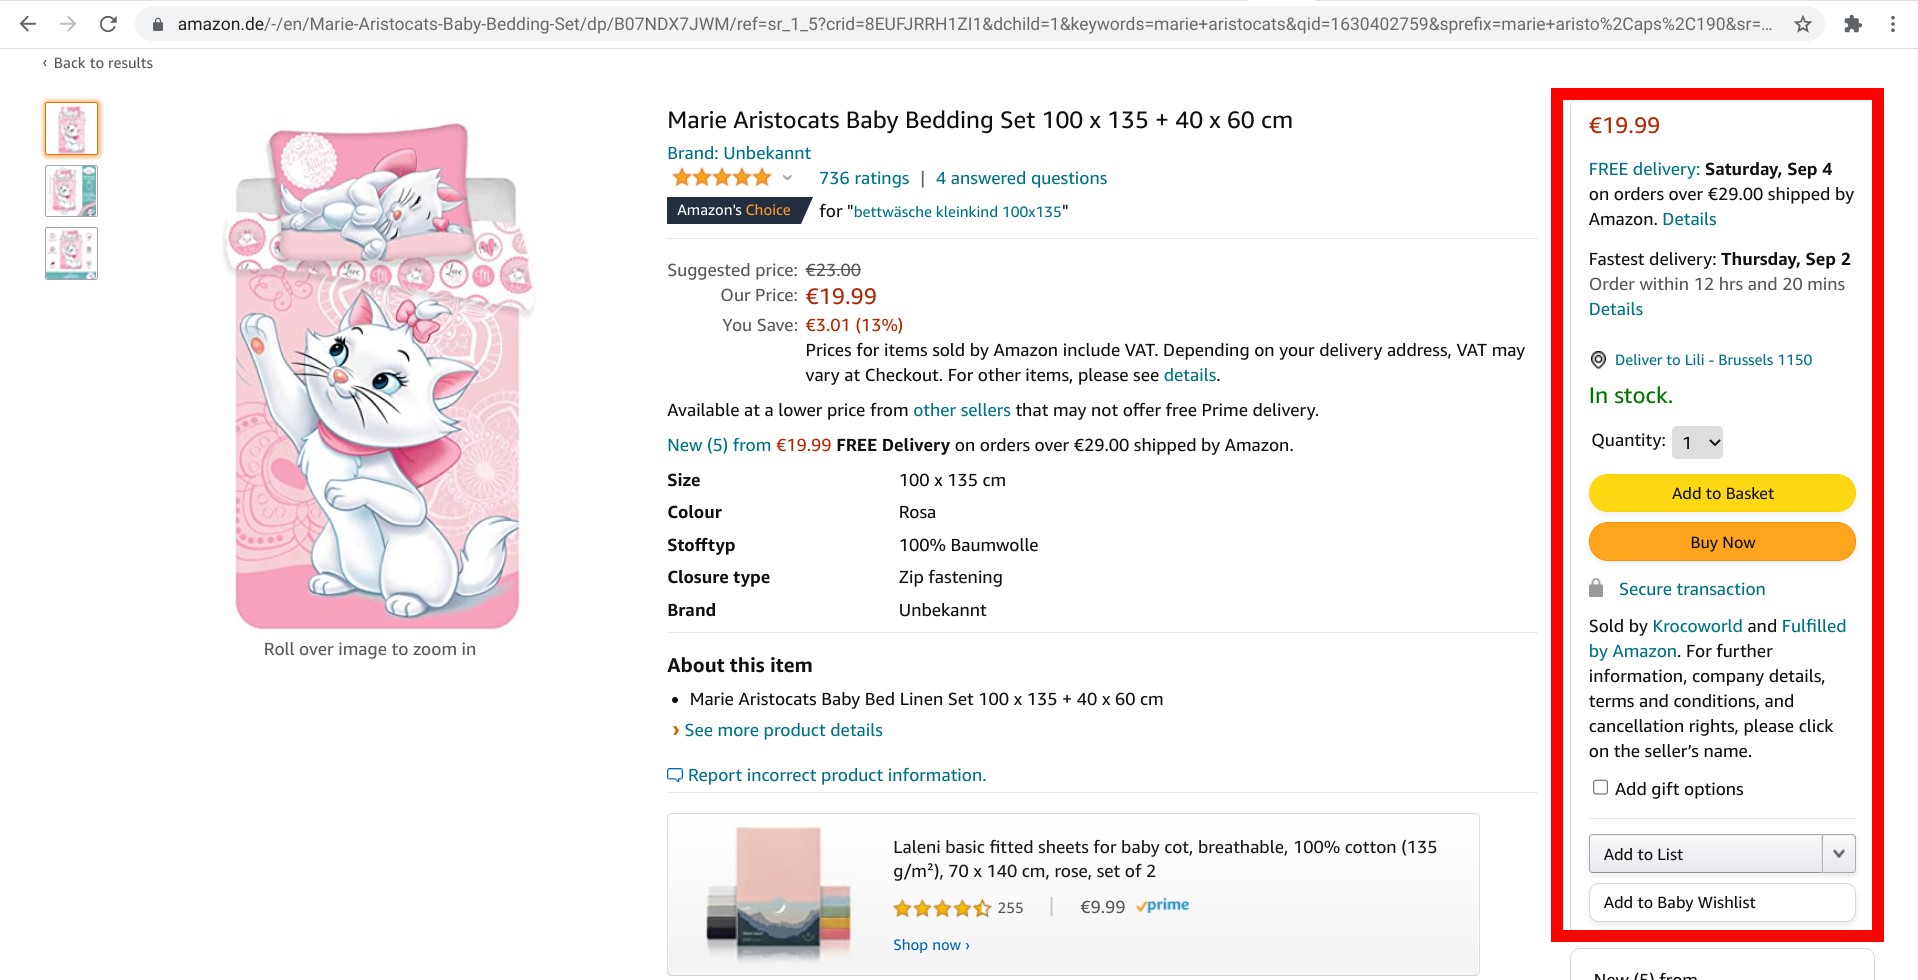 Screenshot of a product page from Amazon.de with the Buy Box highlighted